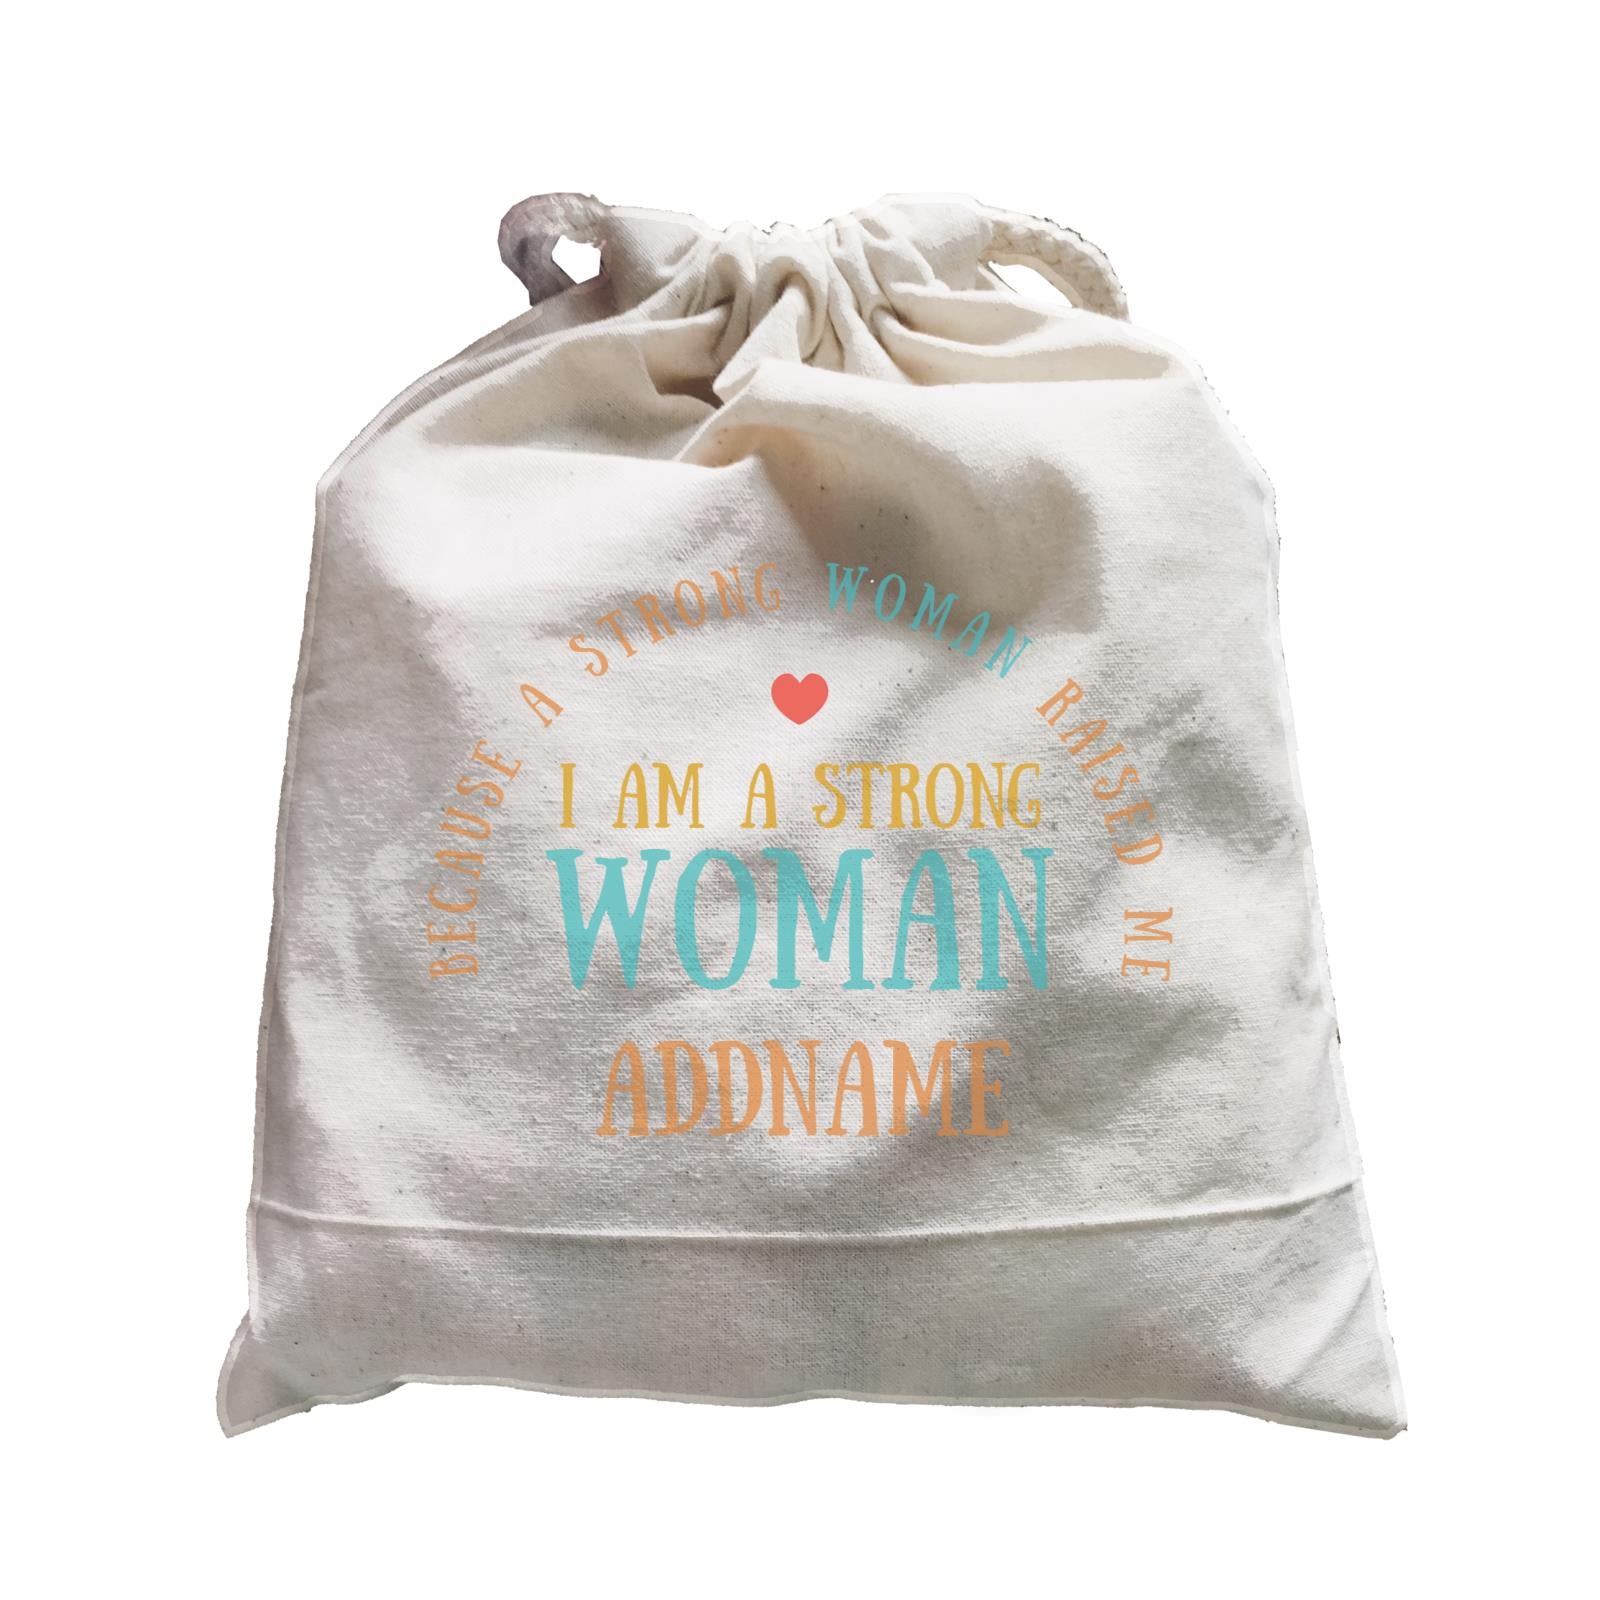 Sweet Mom Quotes 2 I Am A Strong Woman Because A Strong Woman Raised Me Addname Accessories Satchel